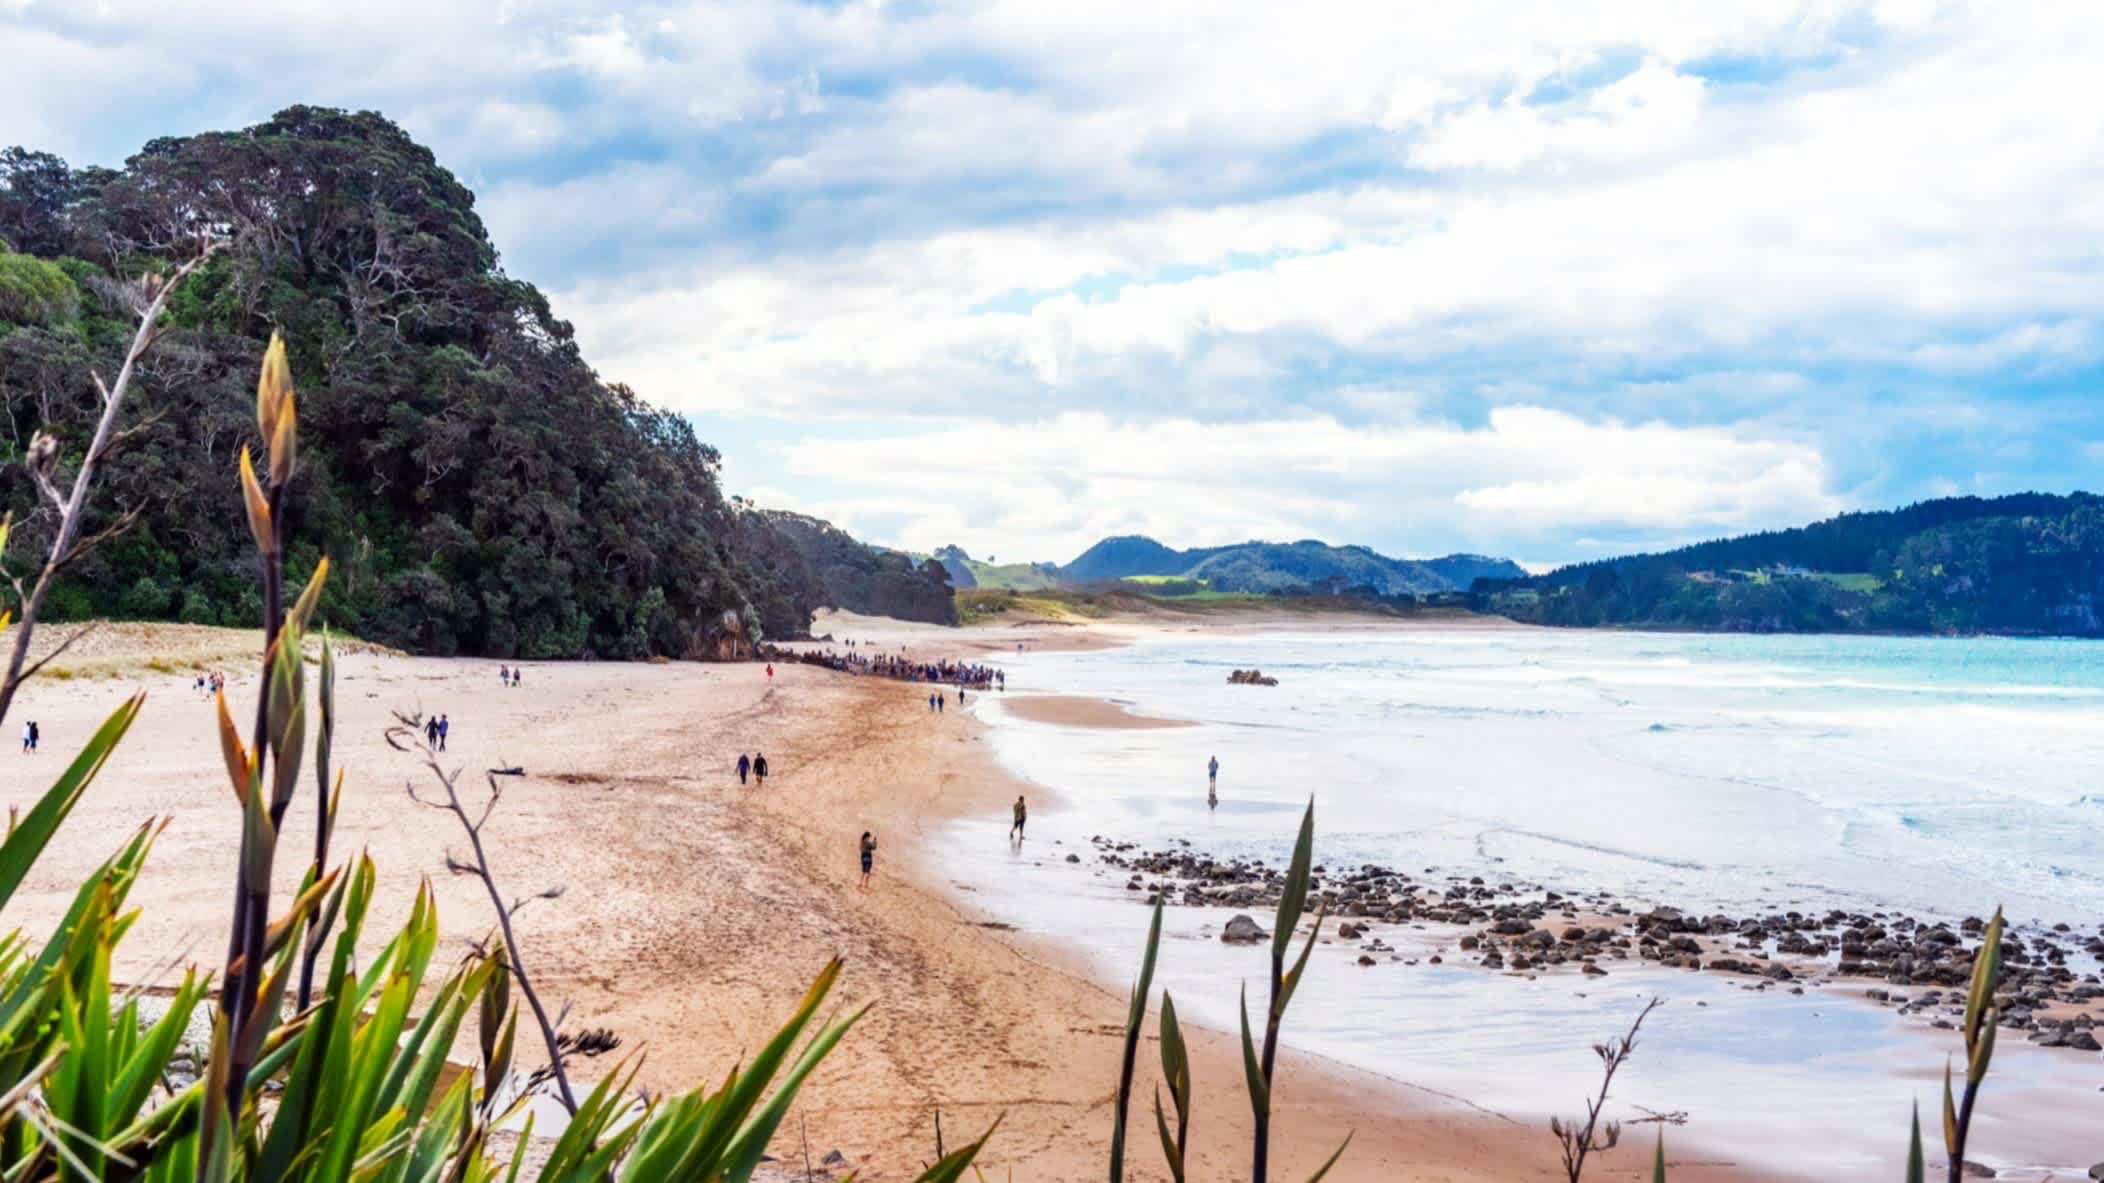 View of Hot Water Beach at low tide with its hot water thermal pool, Coromandel, New Zealand.